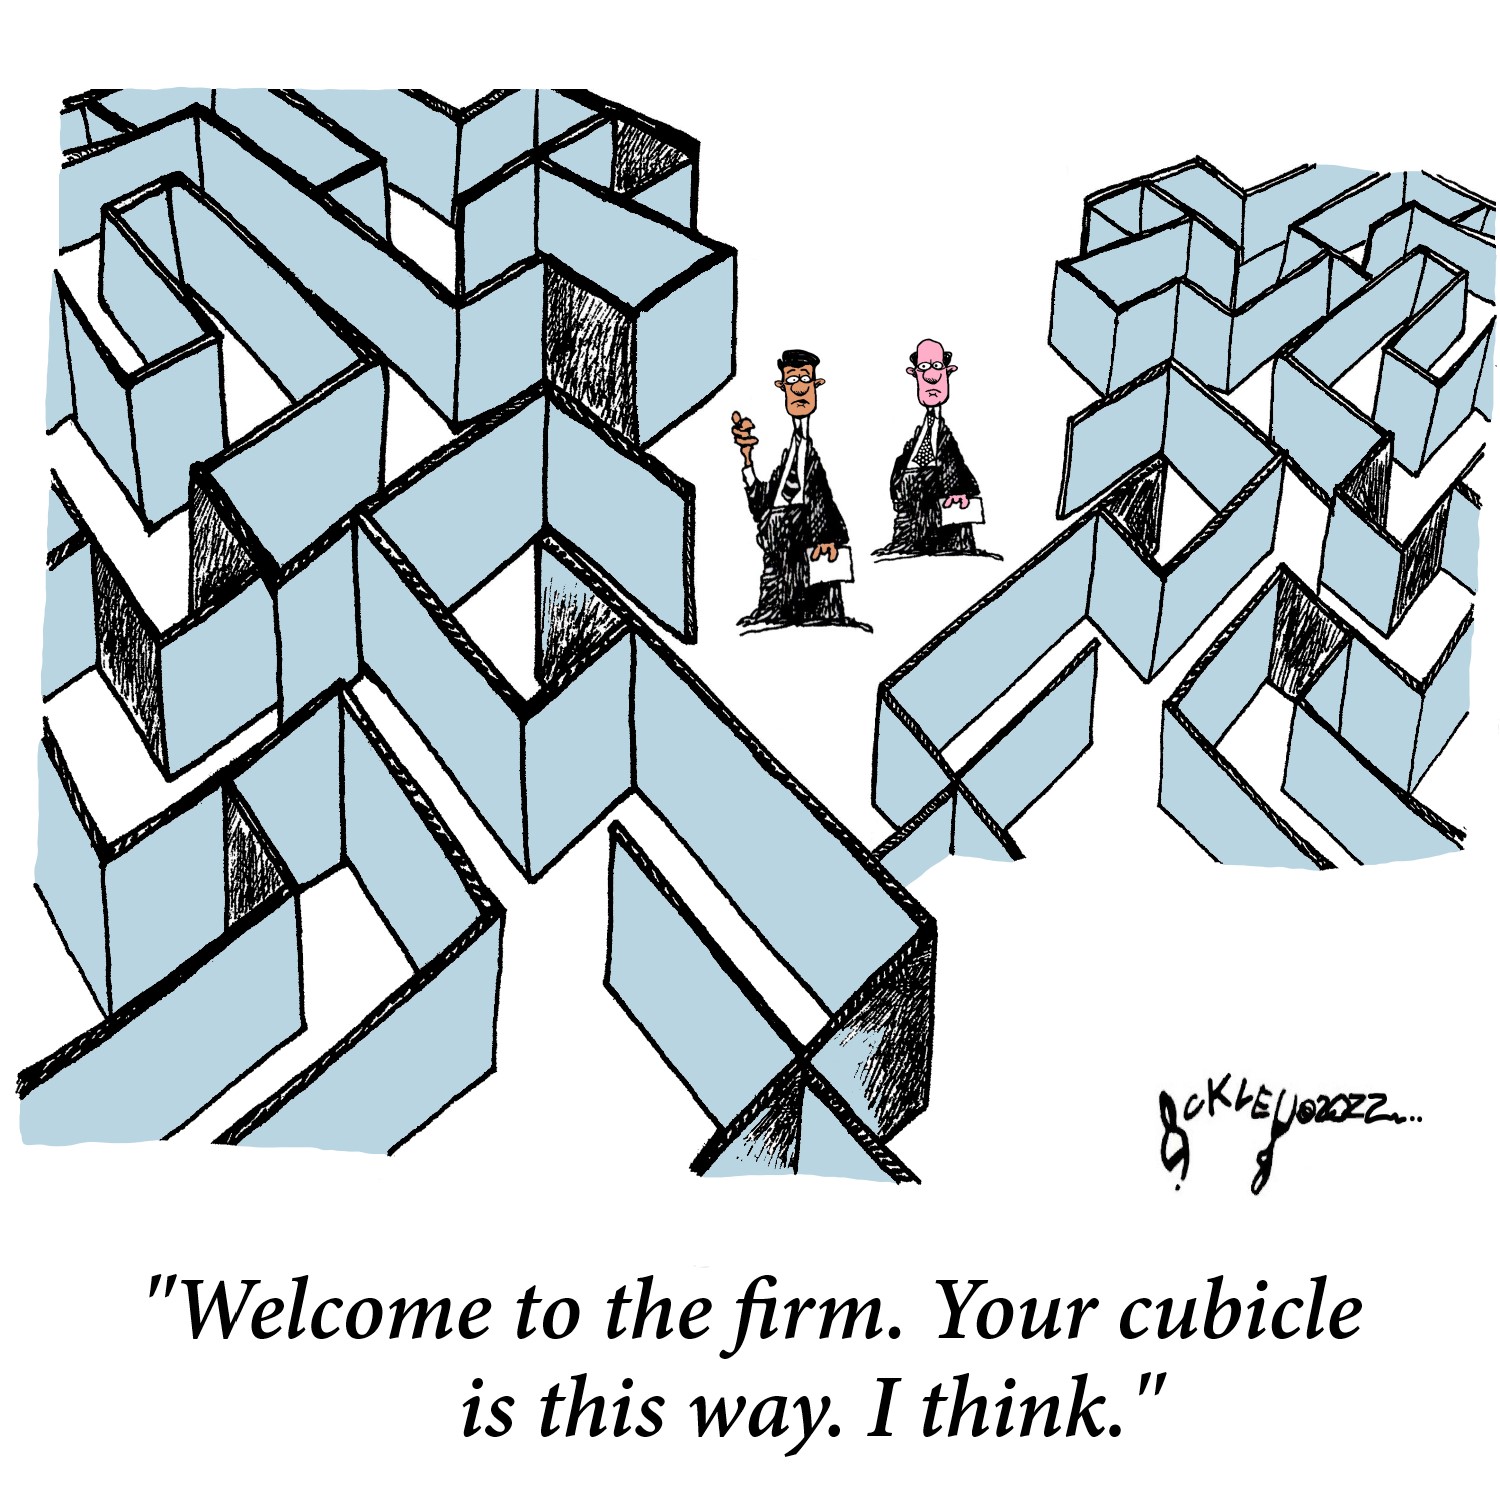 Two Men in Suits stand in the middle of a maze of cubicles “Welcome to the firm. Your cubicle is this way, I think.”